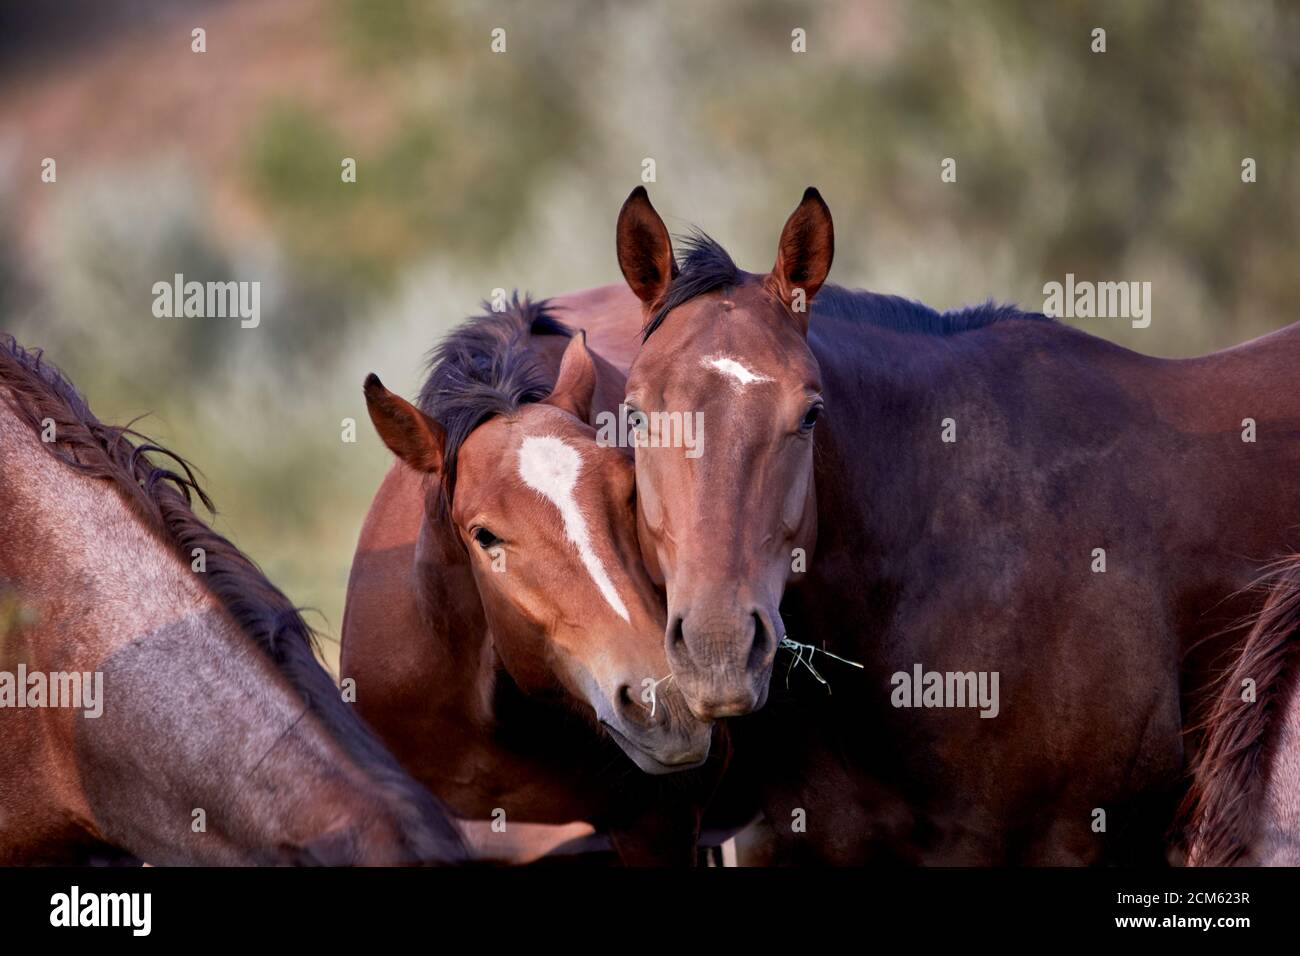 Domesticated young horses in a field with their heads close together and shallow depth of field Stock Photo